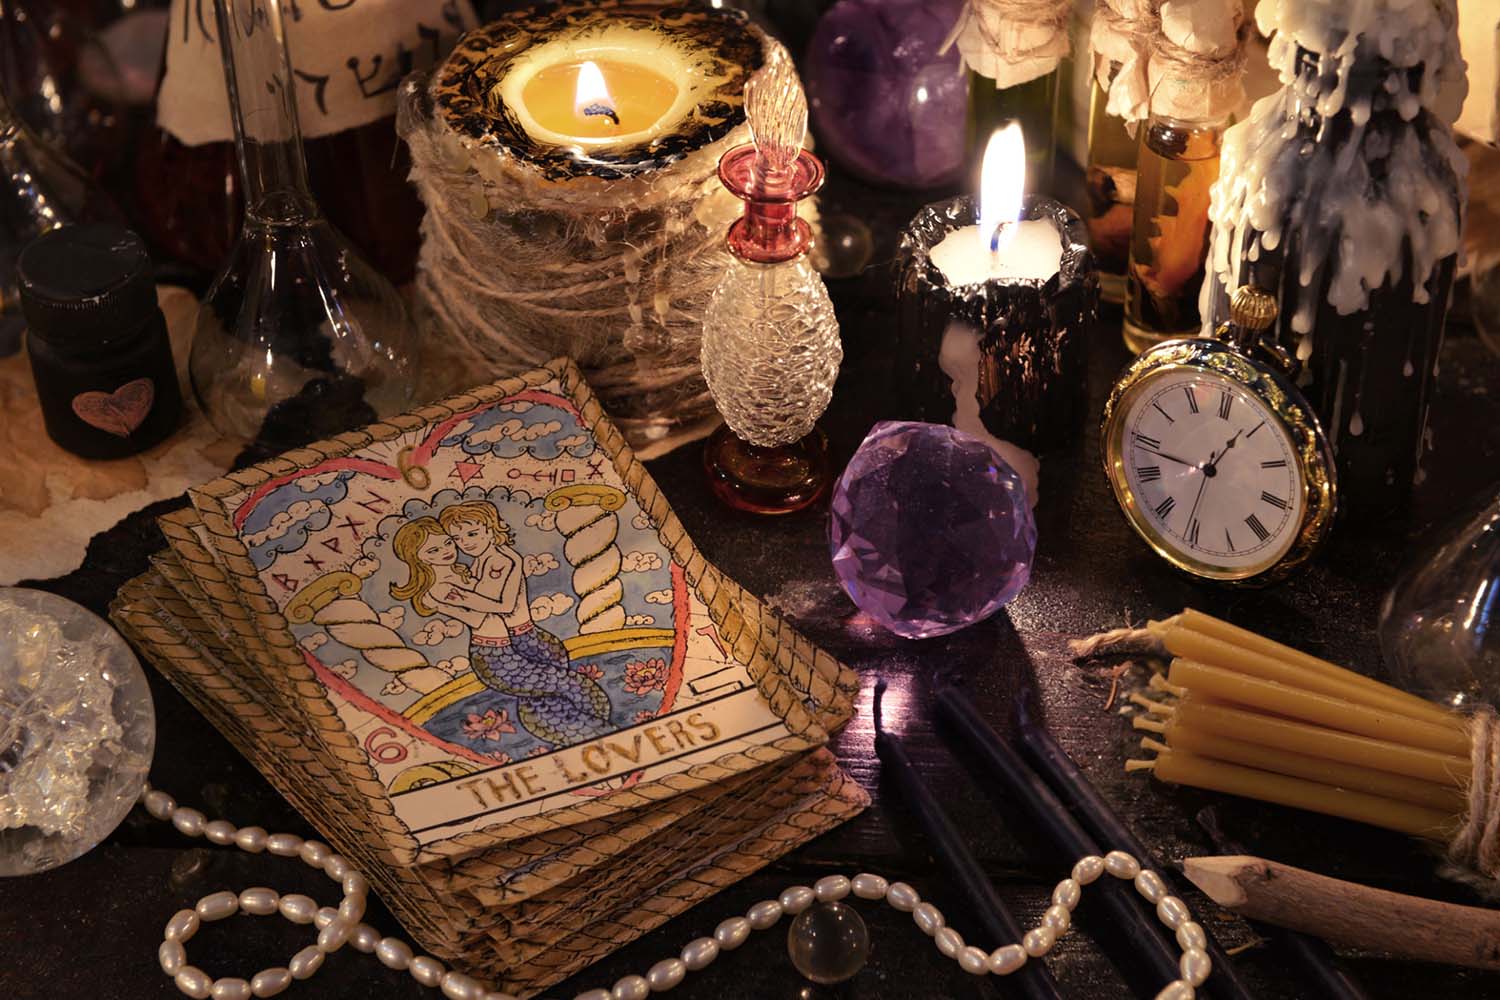 Psychic tools such as tarot cards, candles, pendulum and other ornaments